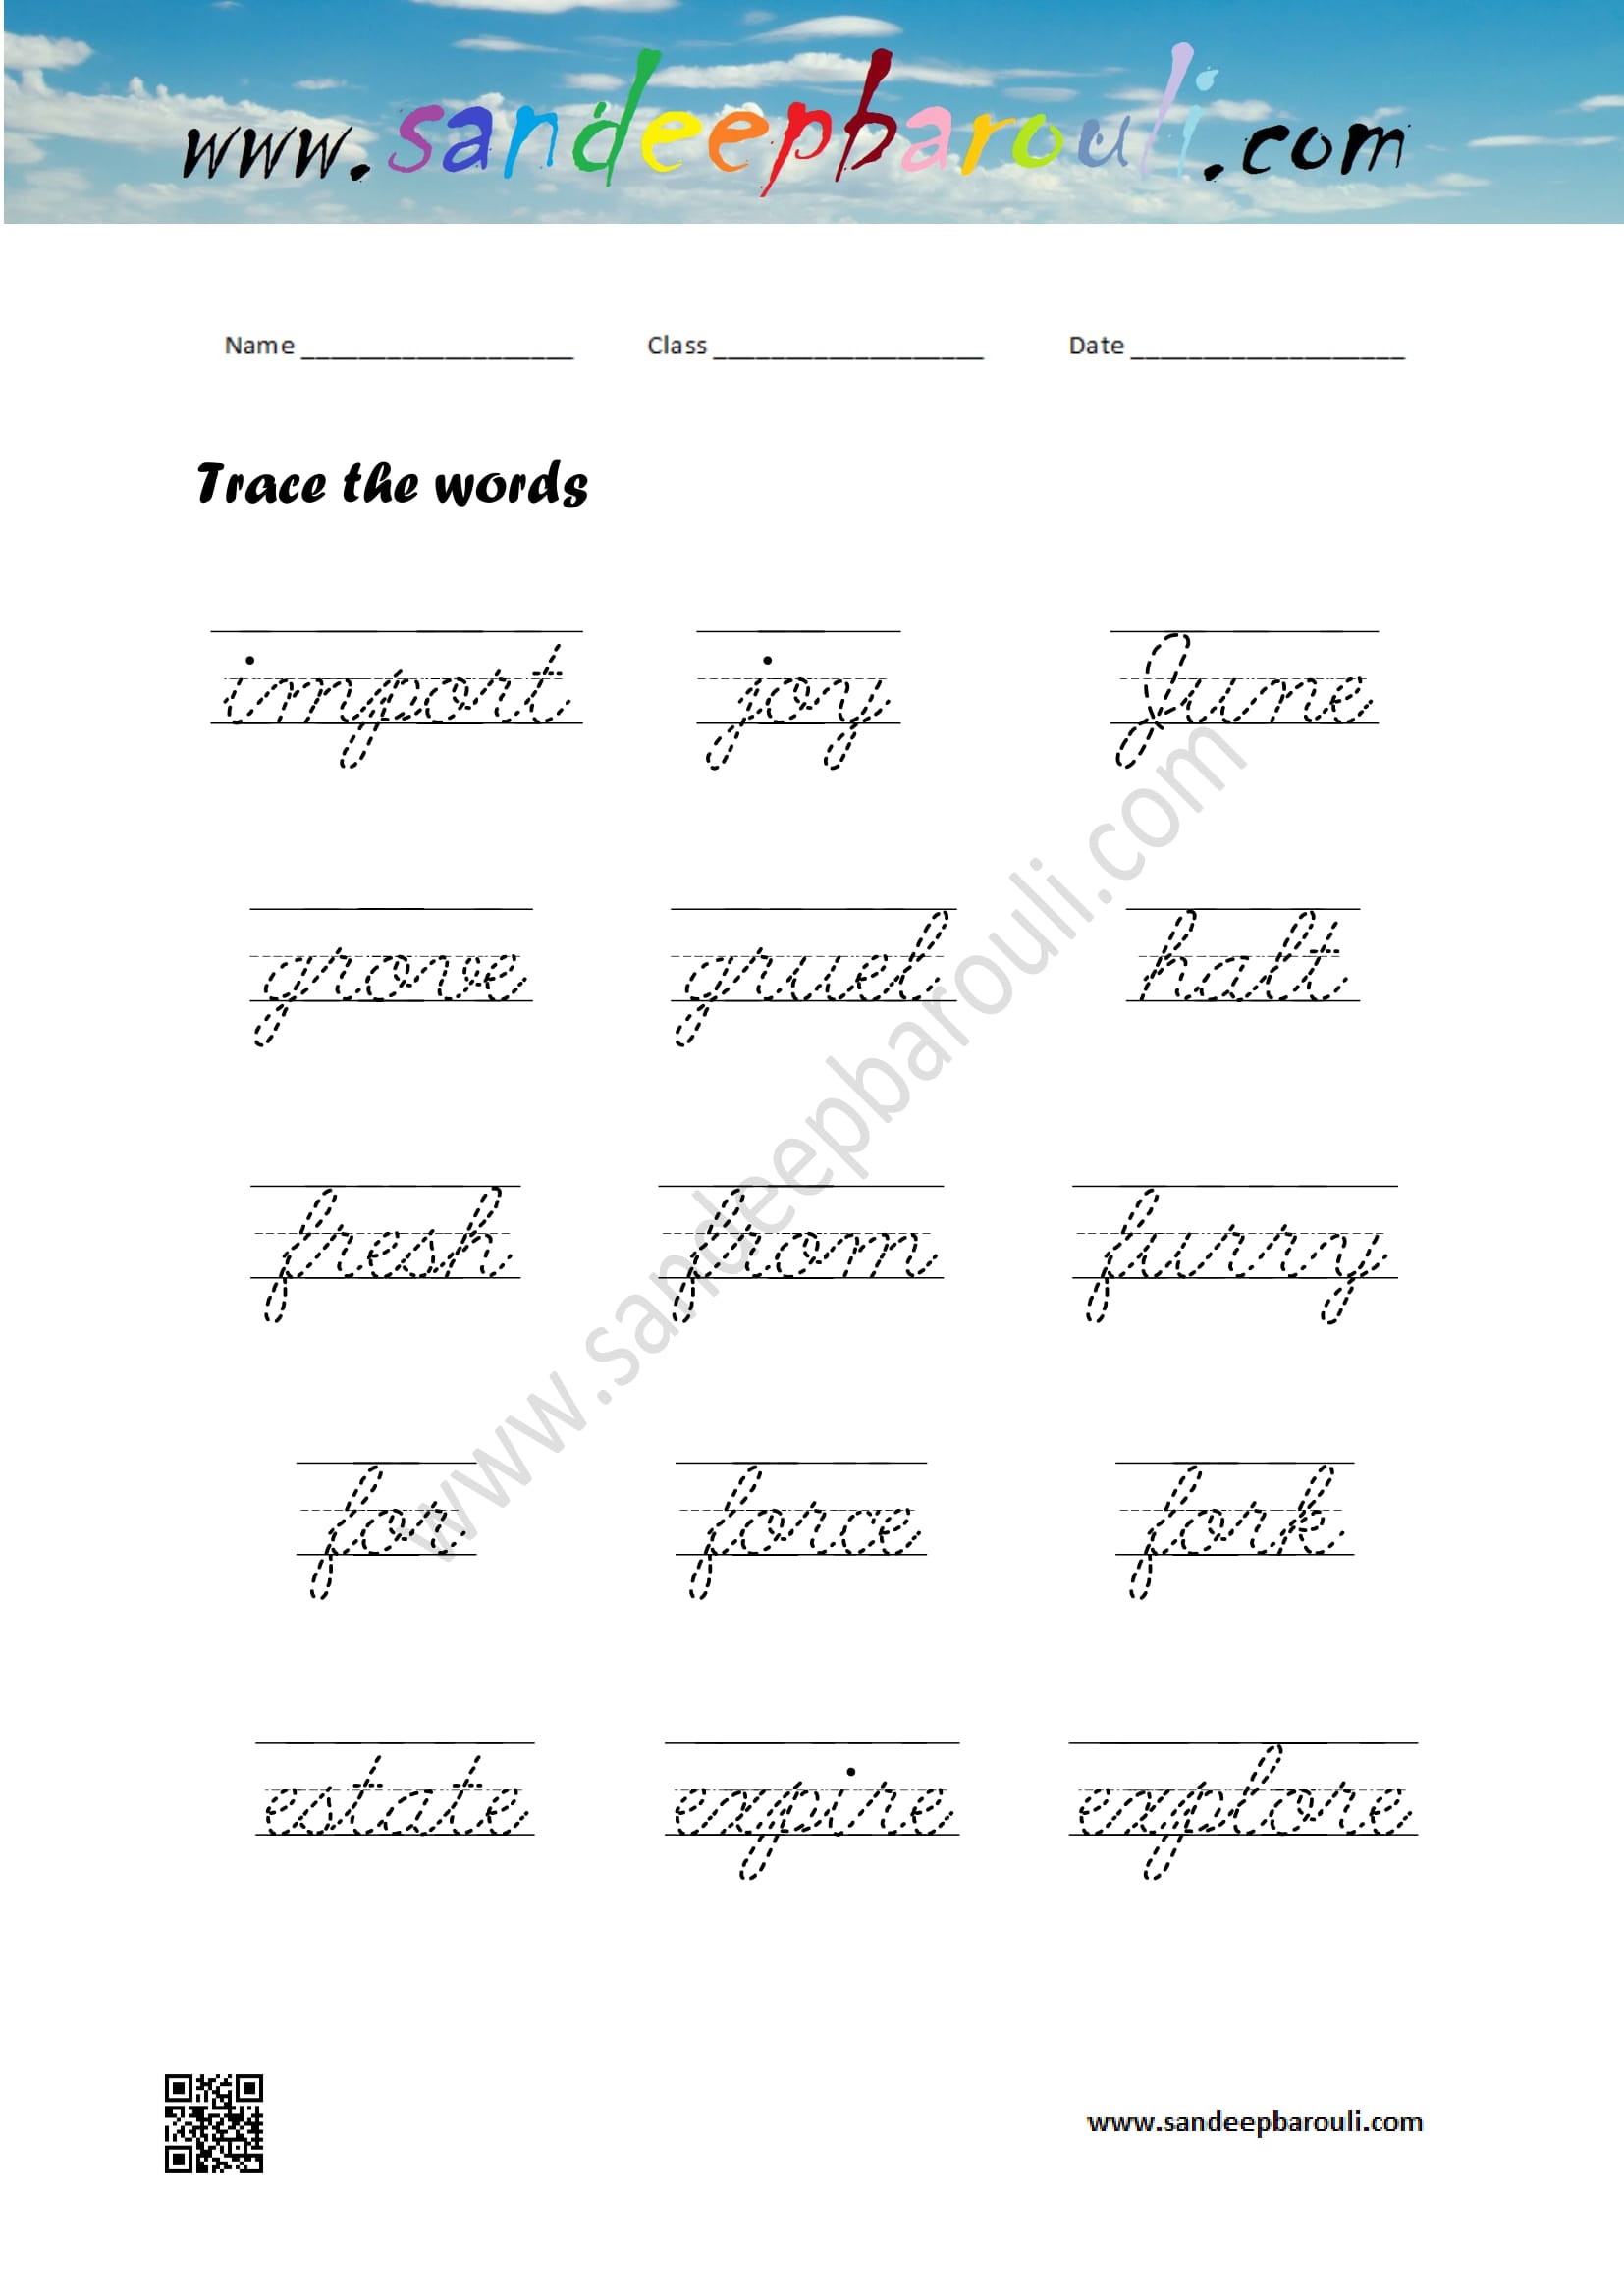 Cursive Writing Worksheet – Trace the words (58)